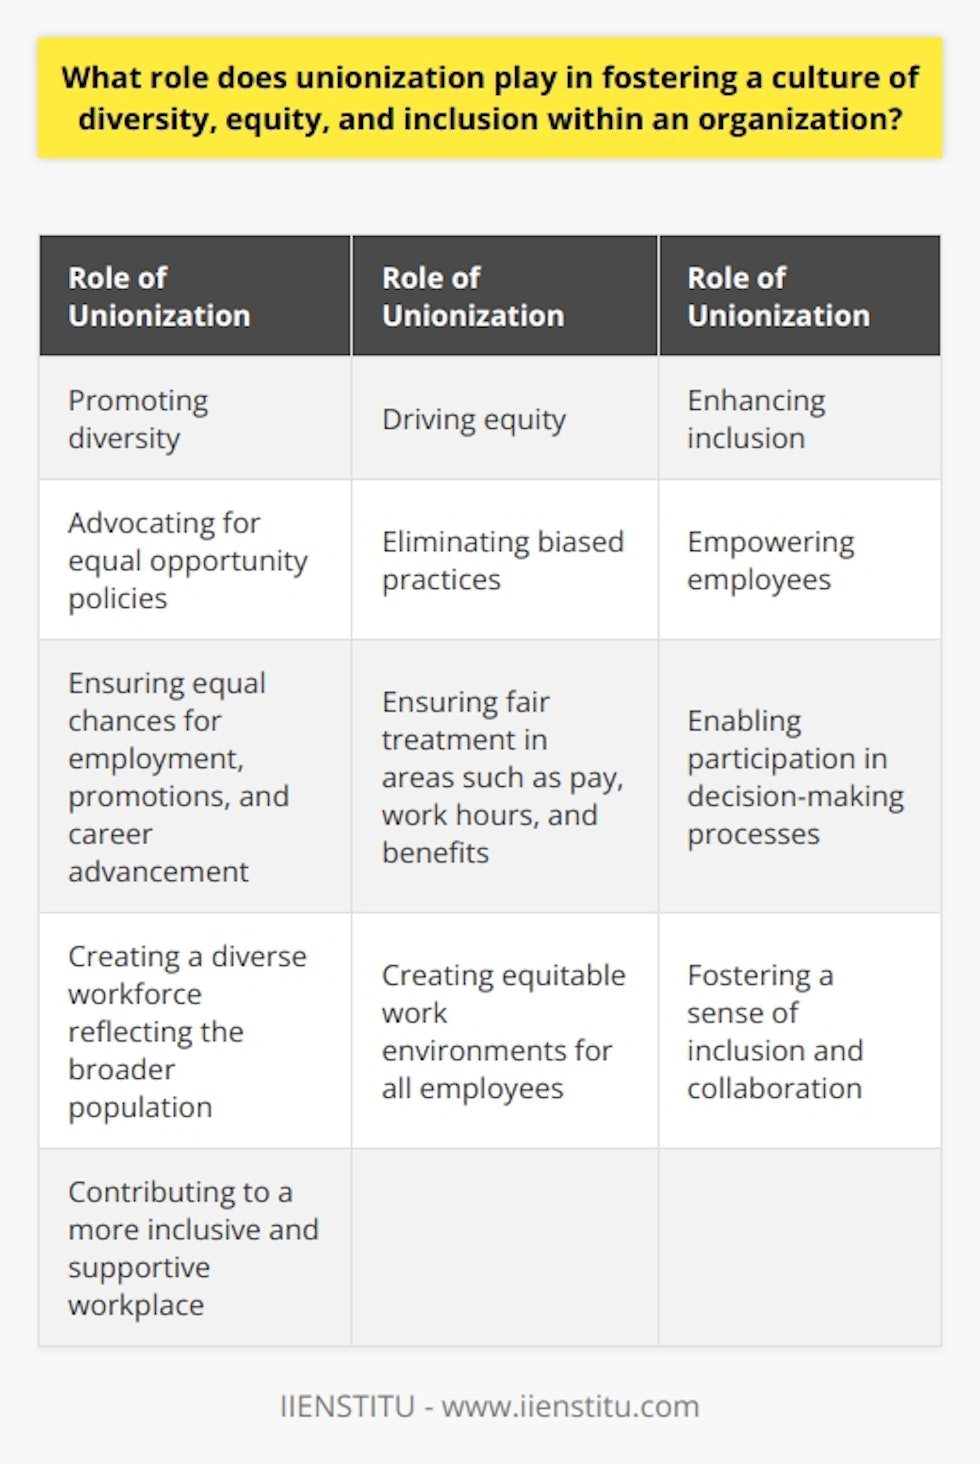 Unionization plays a crucial role in promoting diversity, equity, and inclusion within organizations. By advocating for equal opportunity policies, unions ensure that individuals from diverse backgrounds have the same chances for employment, promotions, and career advancement. This helps create a more diverse workforce that reflects the broader population.Furthermore, unions drive equity by pushing organizations to eliminate biased practices in areas such as pay, work hours, and benefits. This ensures fair treatment and equal opportunities for all employees, regardless of their race, gender, age, or any other defining characteristic. By standing up against discrimination, unions help create more equitable work environments.Inclusion is also a key aspect of unionization. Unions empower employees to have a voice and participate in decision-making processes within the organization. This active involvement and acknowledgement of every member, regardless of their social identity or job role, fosters a sense of inclusion. In turn, this boosts employee morale, leading to a more collaborative and productive work environment.In conclusion, unionization acts as a catalyst in fostering a culture of diversity, equity, and inclusion within organizations. It promotes equal treatment and opportunities for all individuals, regardless of their differences. A diverse, equitable, and inclusive culture not only stems from unionization but also contributes to its strength and sustainability. By working together, unions and organizations can create a more inclusive and supportive workplace for everyone involved.